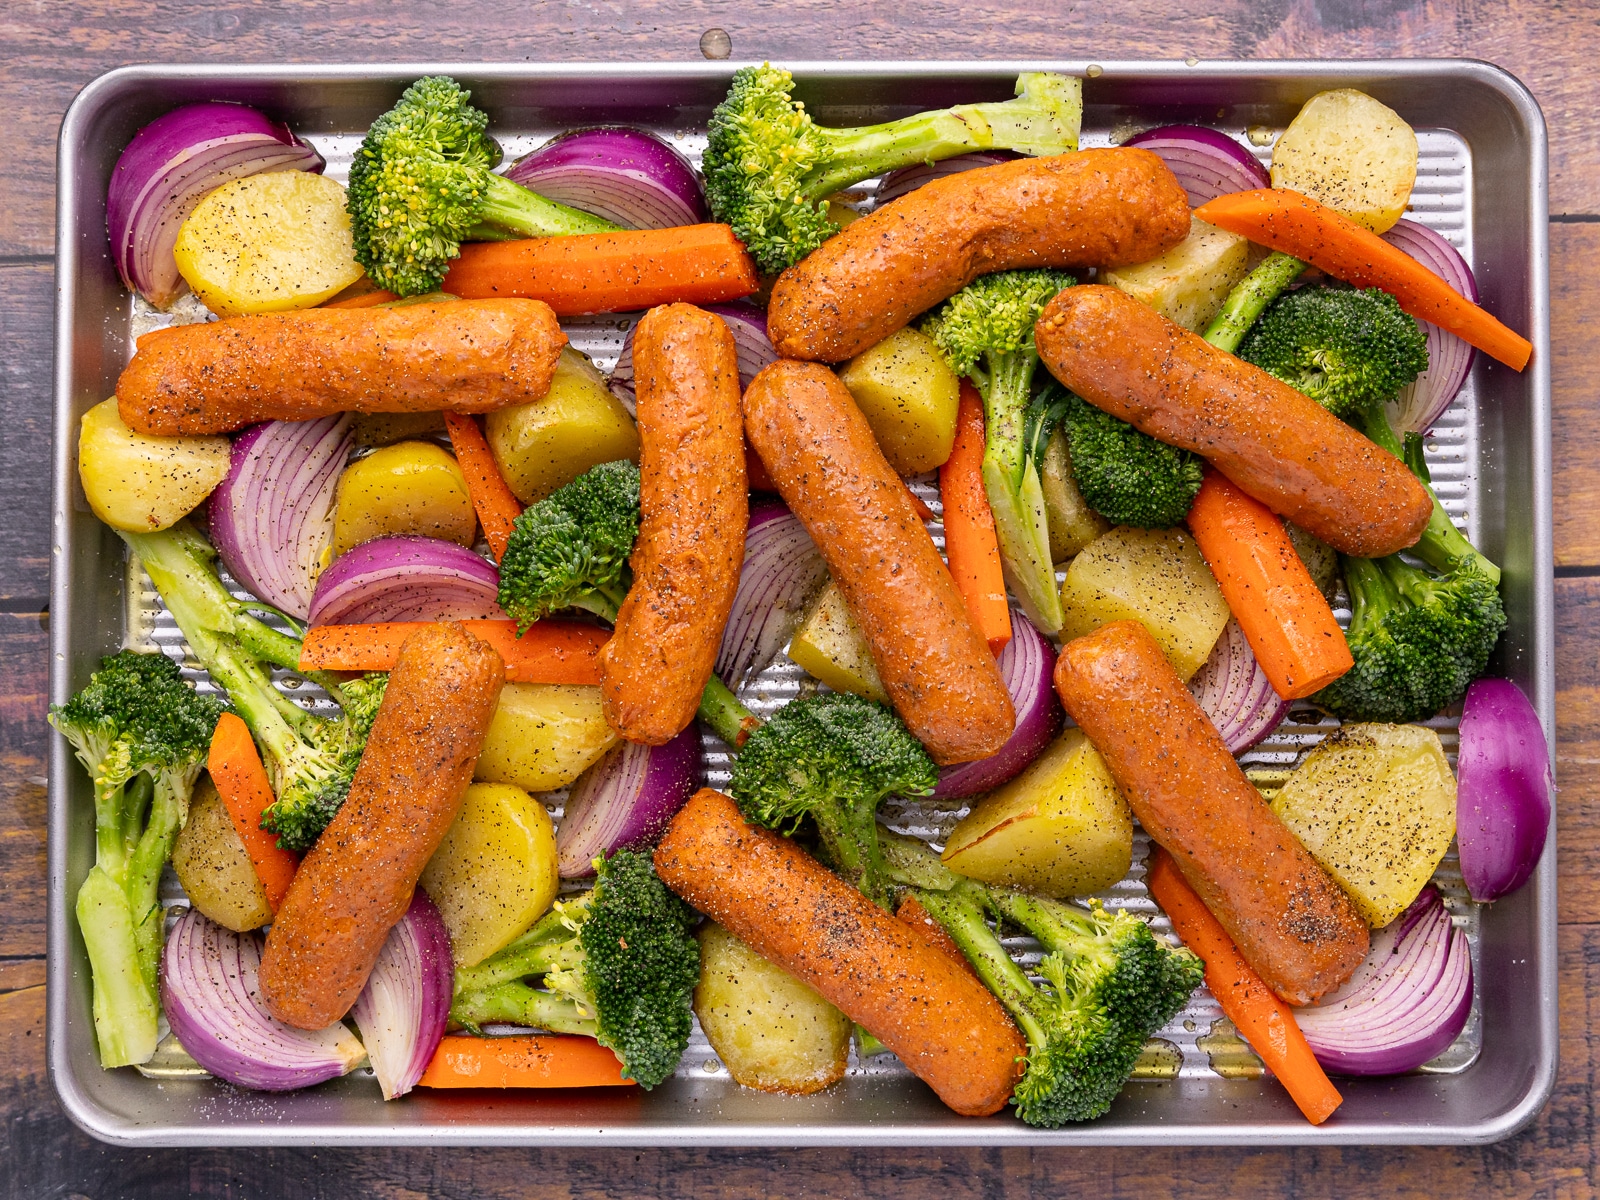 uncooked sausages and vegetables on a baking tray